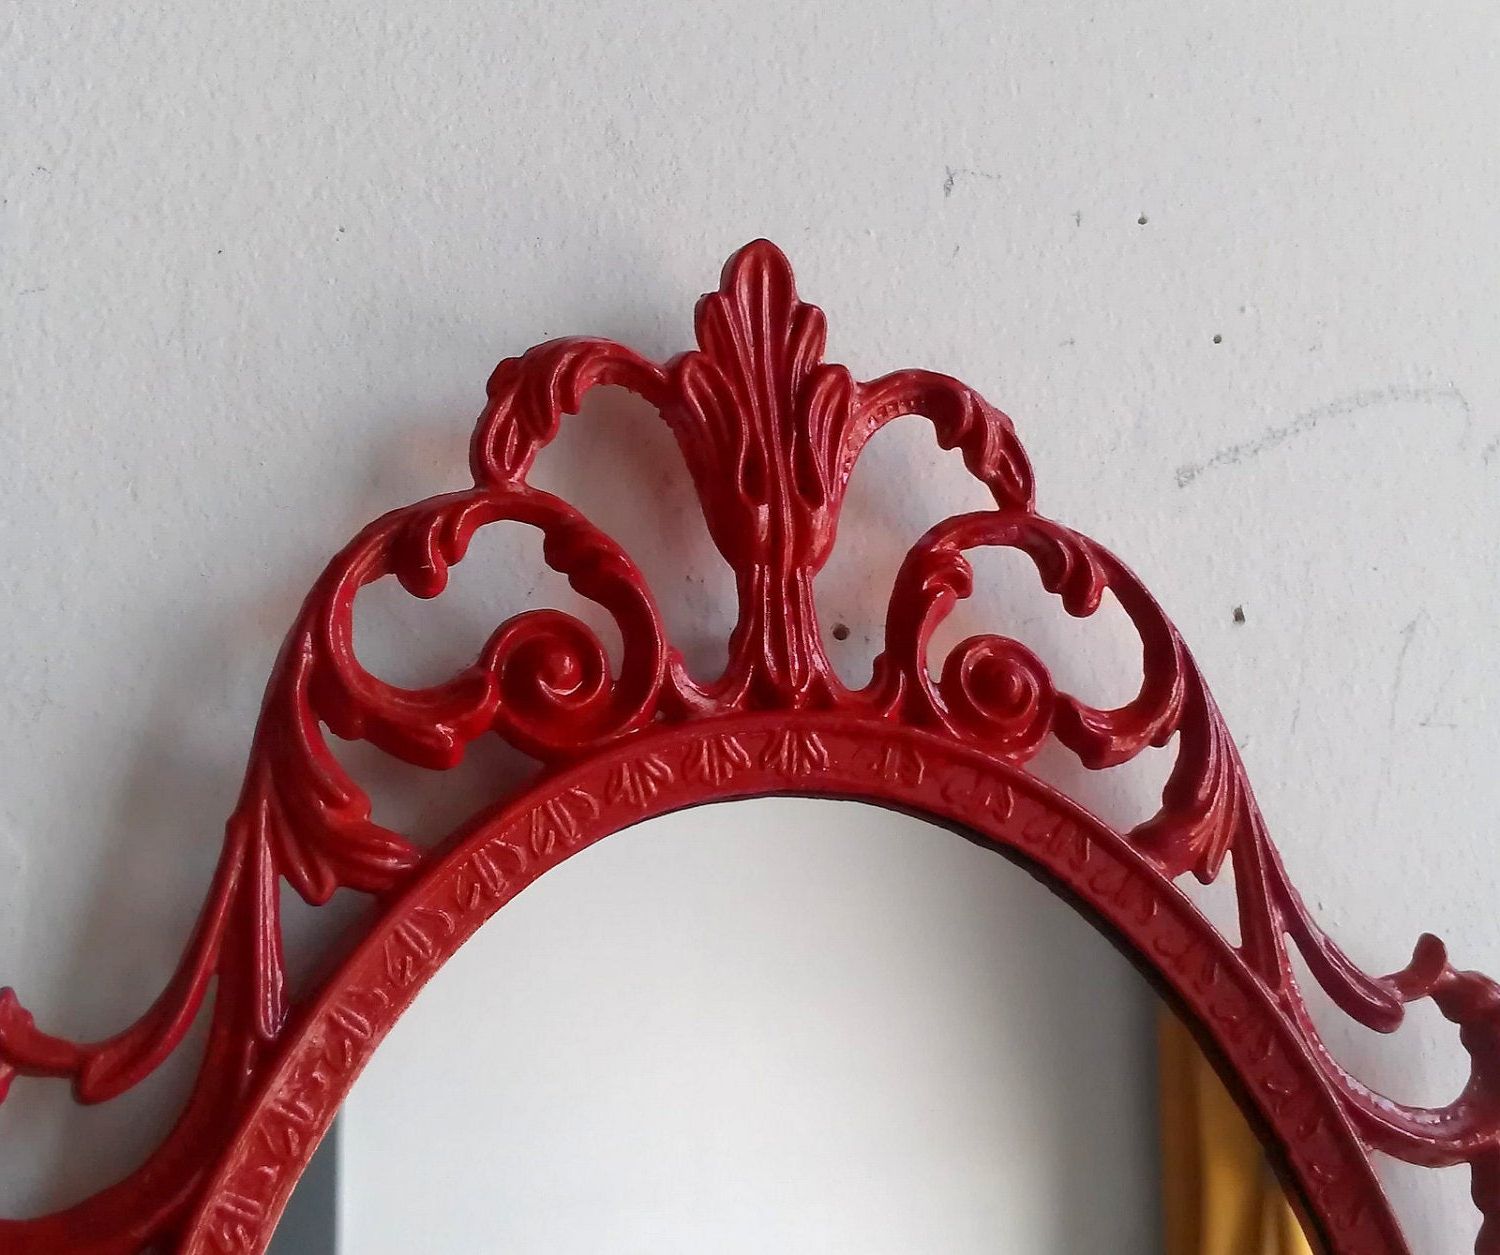 Princess Wall Mirrors Intended For Current Princess Wall Mirror – Ornate Oval Frame In Ruby Red – 107 Inches (View 13 of 20)